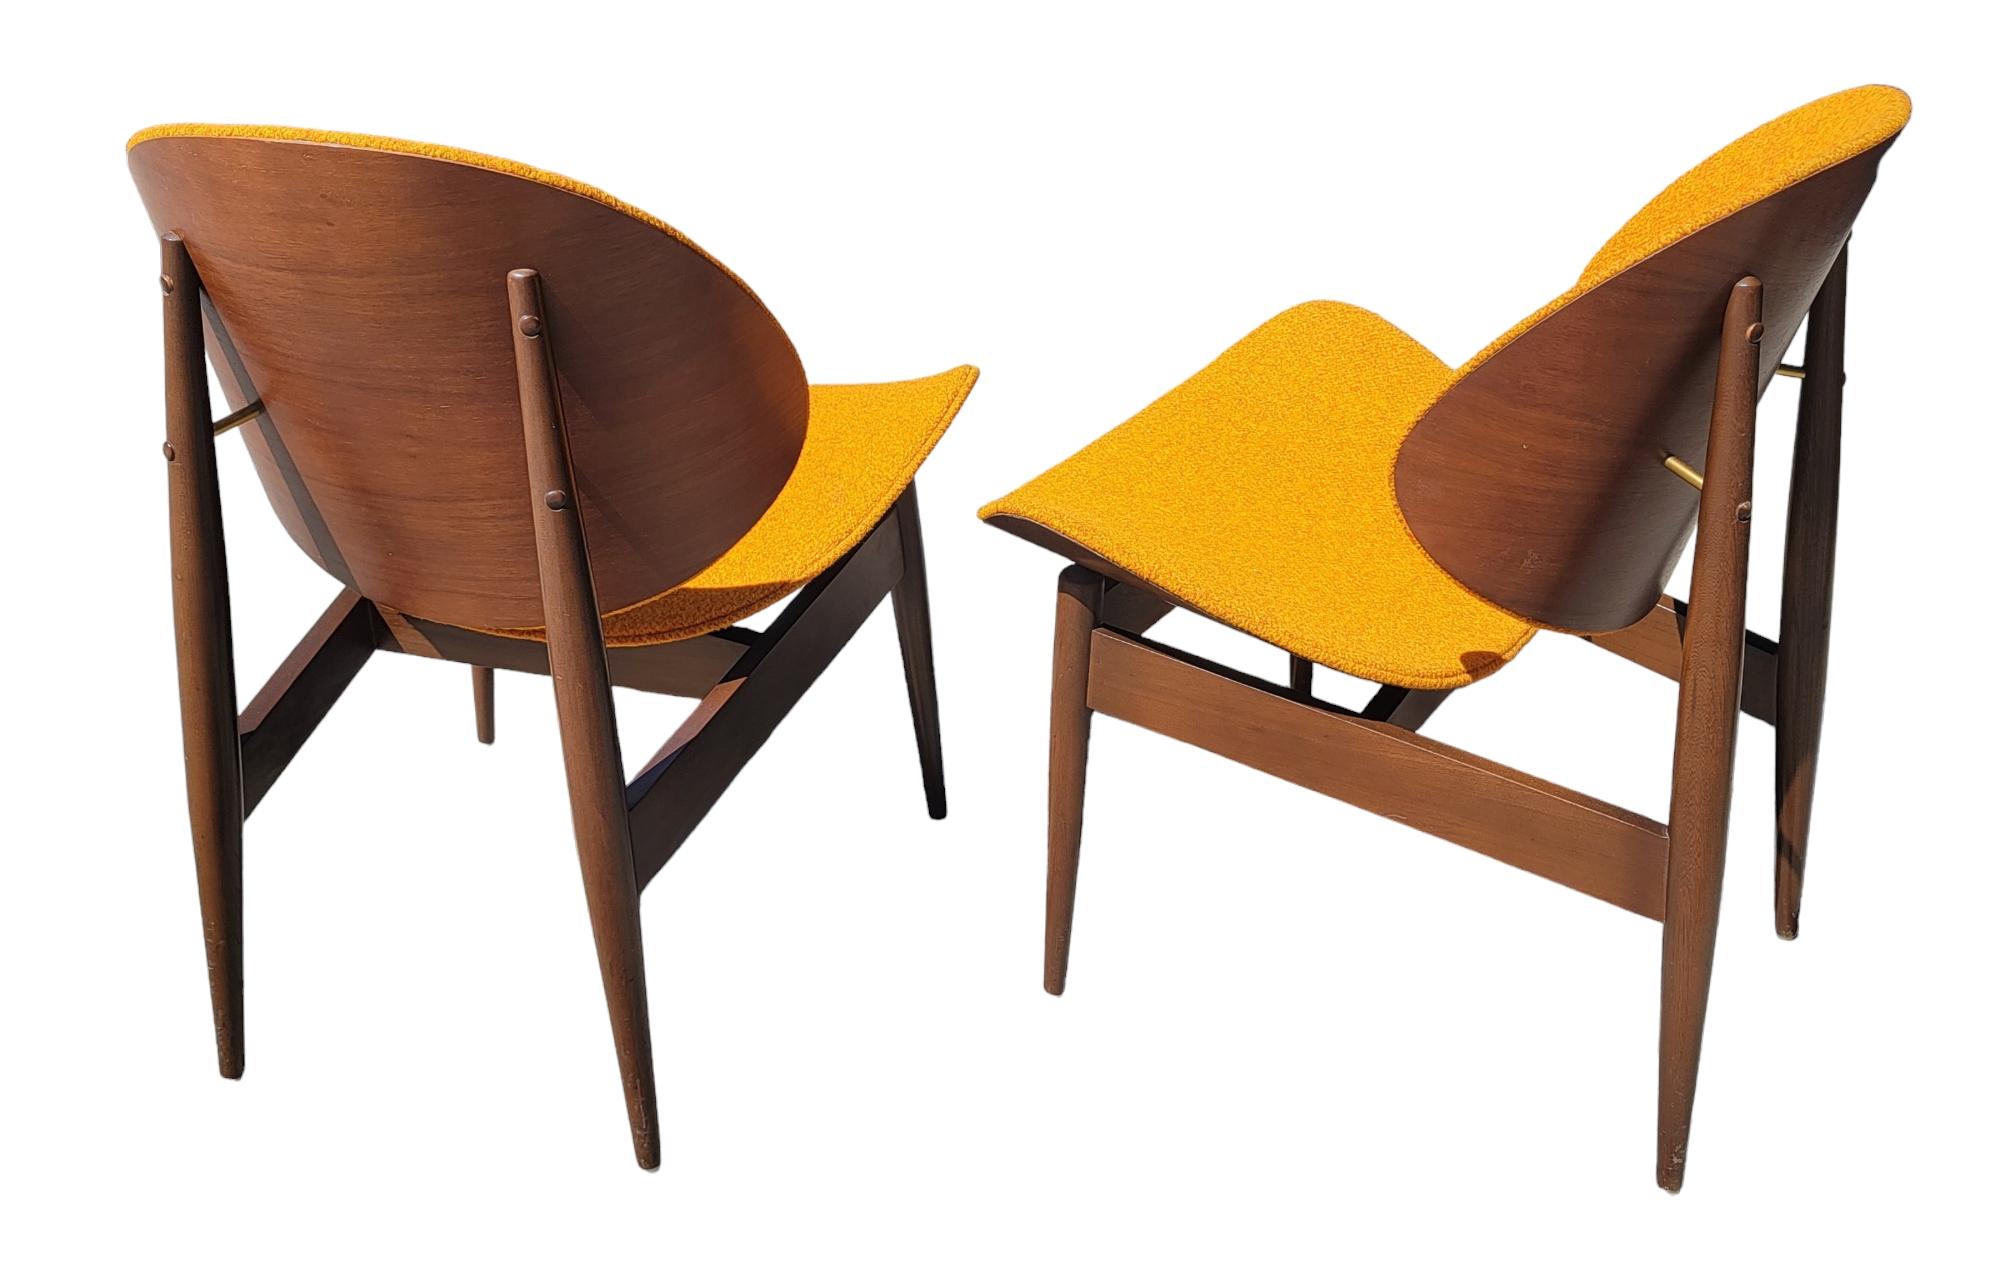 1970s Kodawood Wooden Oyster chairs by  Seymour James Weiner. The design is remarkable with a sleek refined look. The curved chair is known as the 